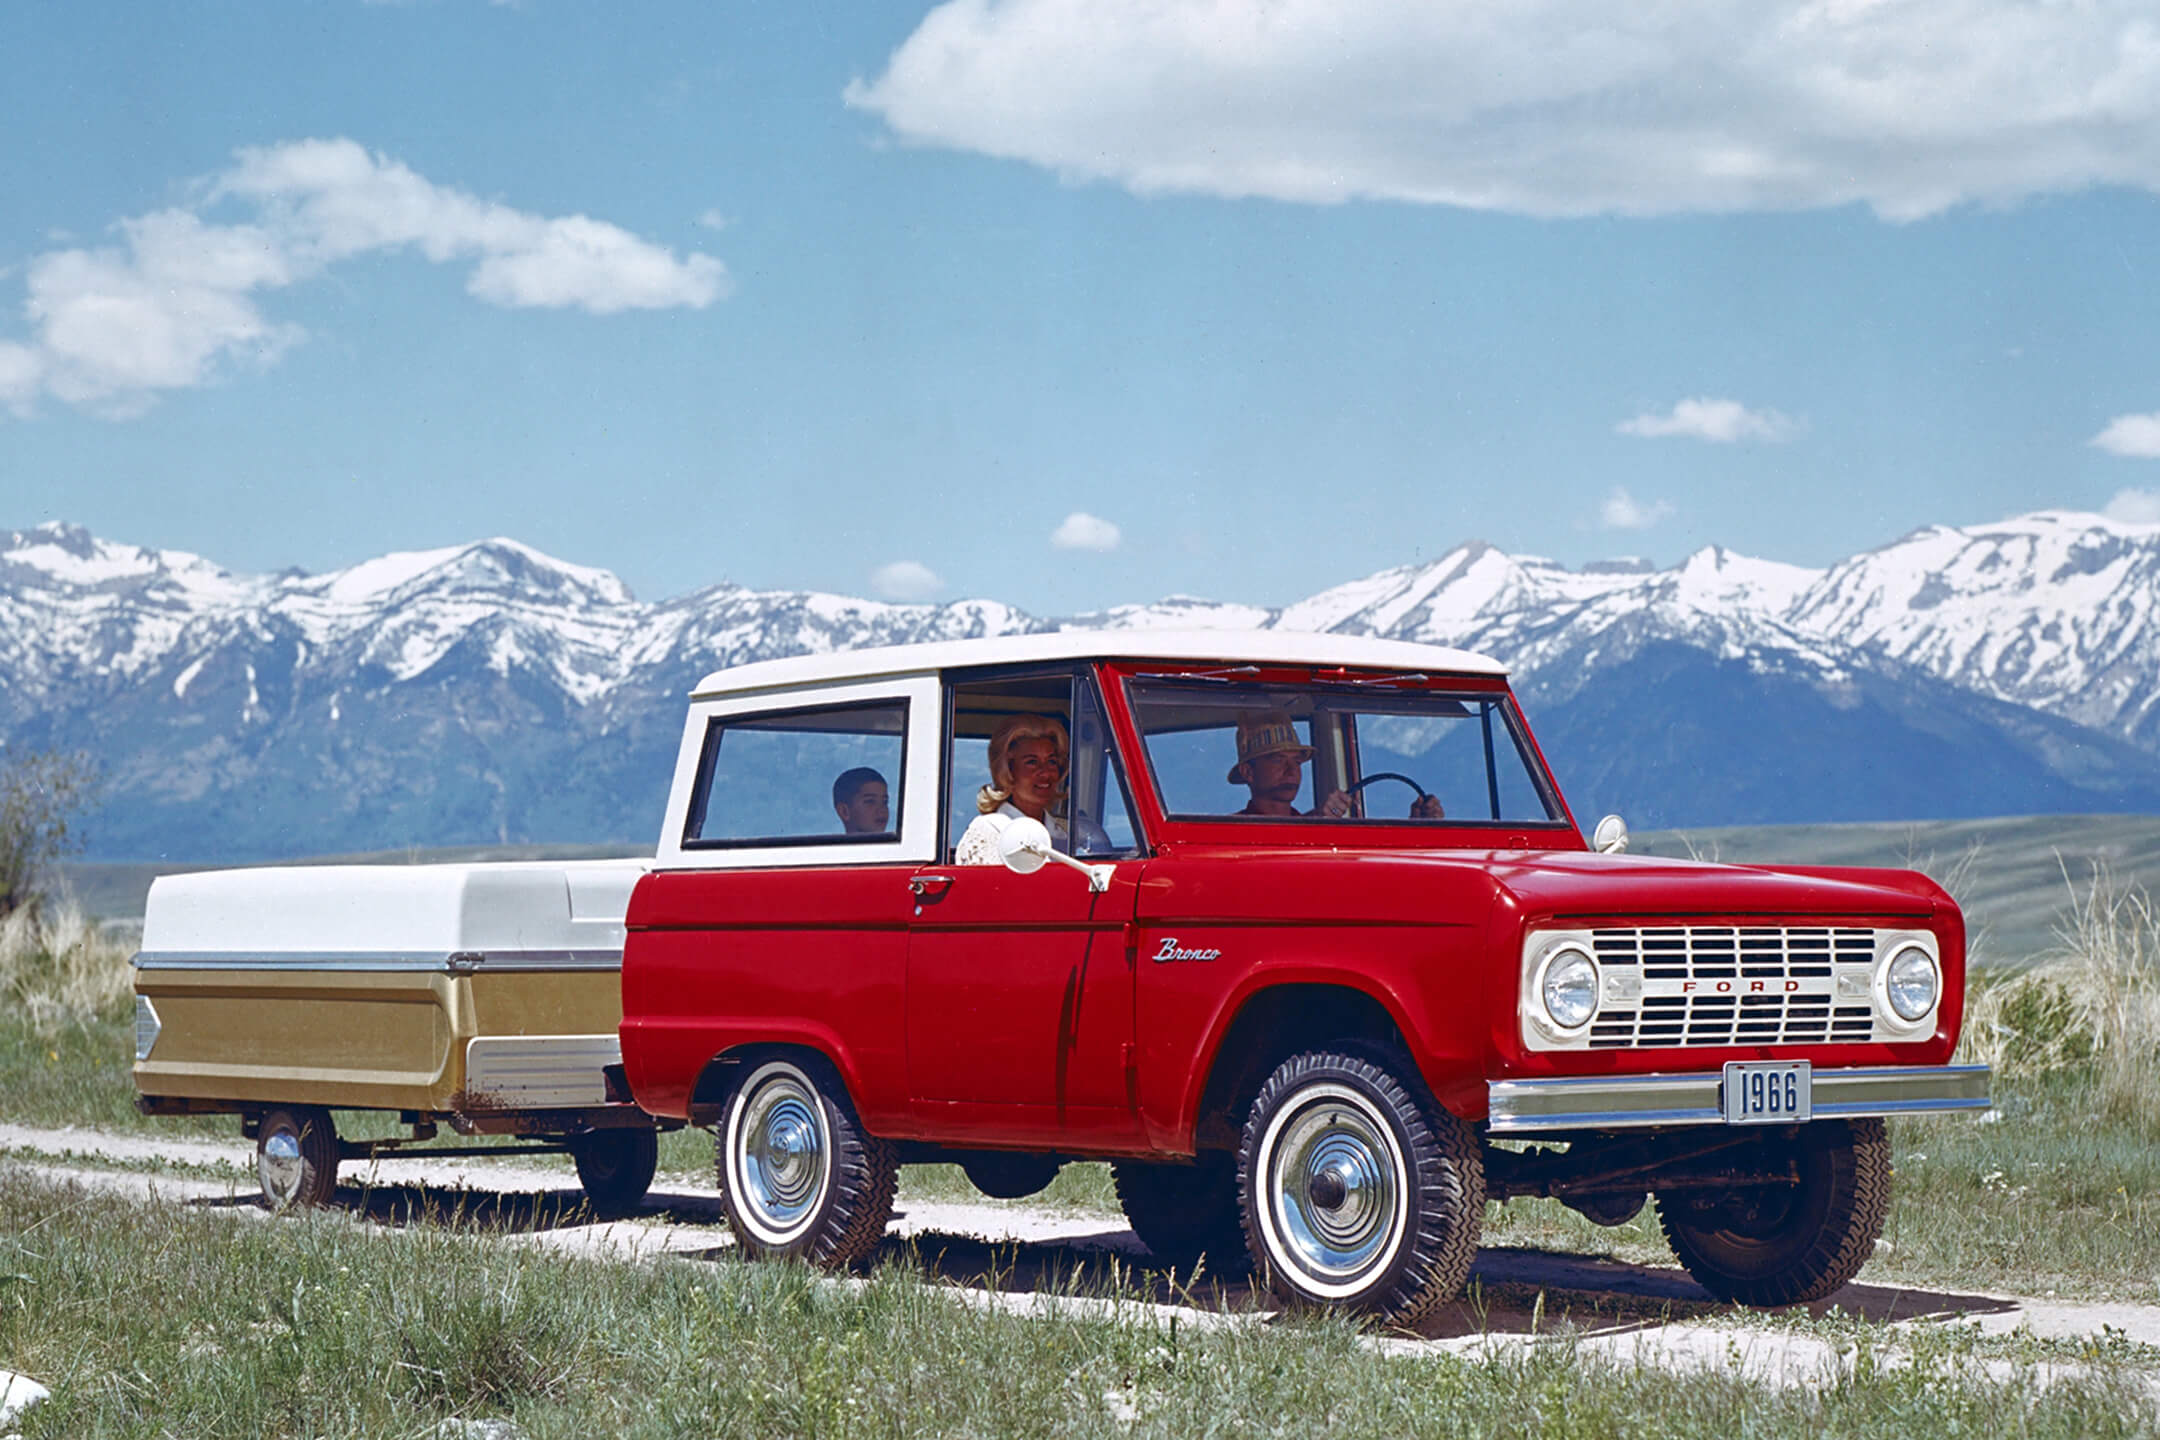 1966 Ford Bronco: the original in a Ford Mo Co period advertisement